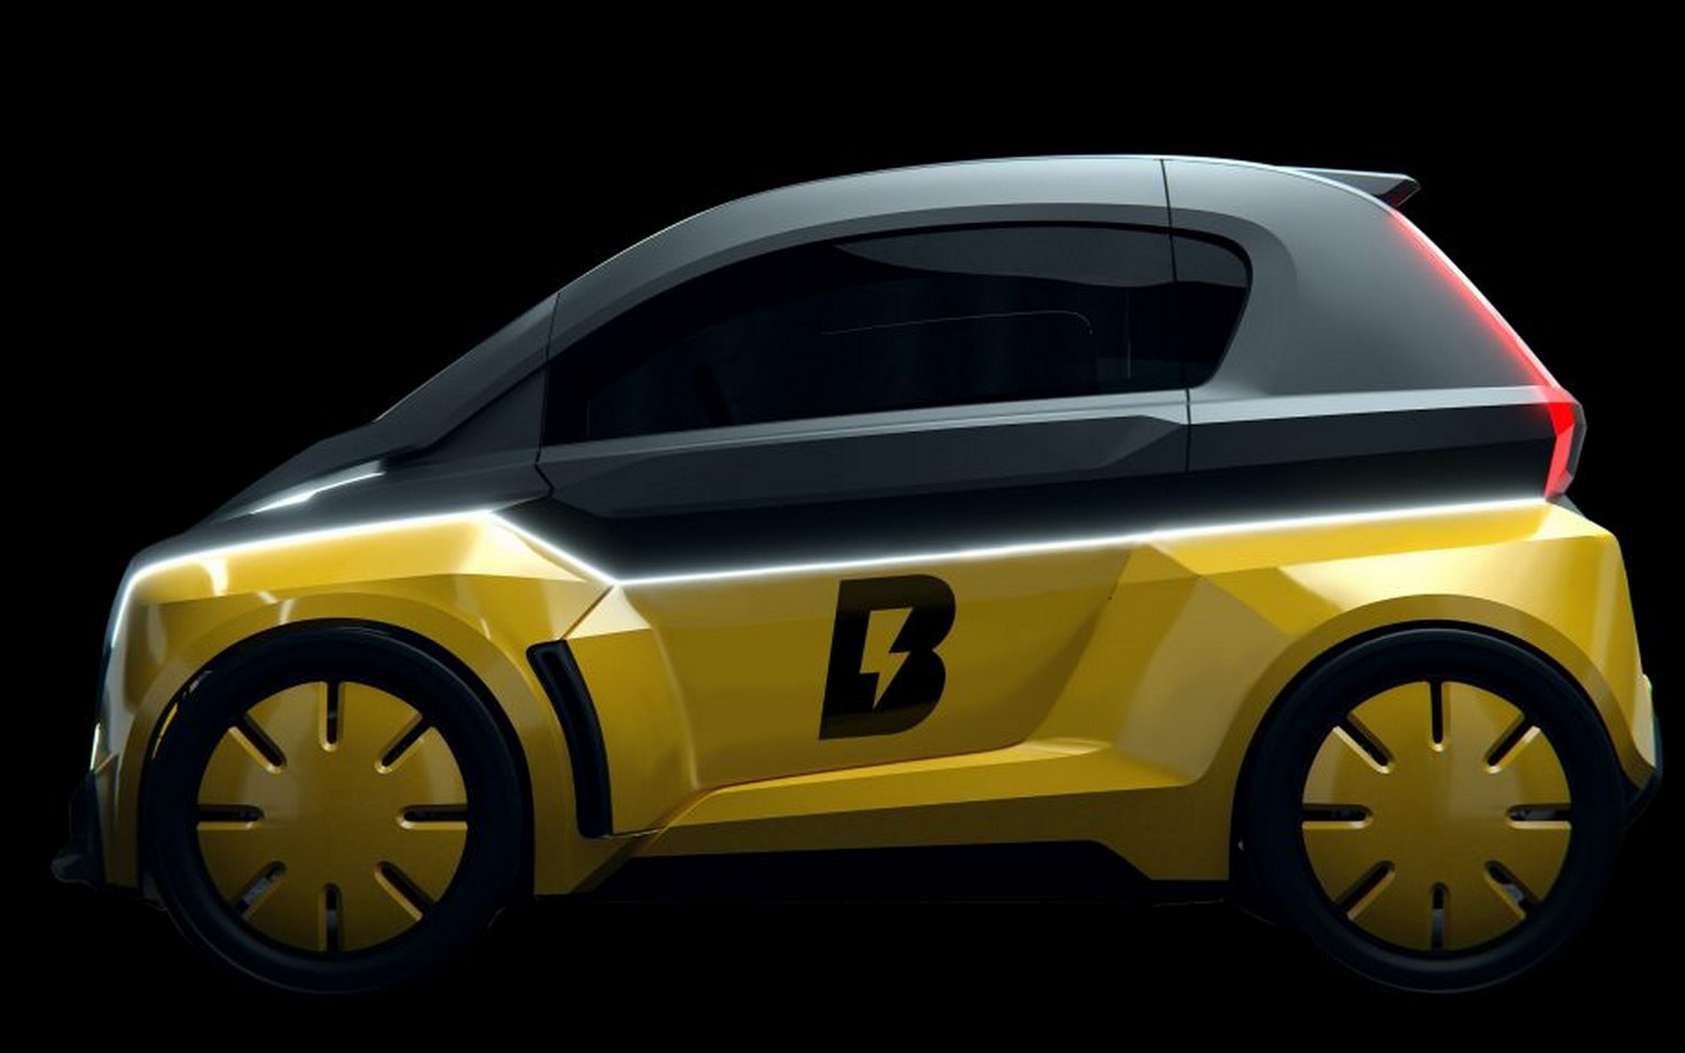 usain bolt launches into the electric car